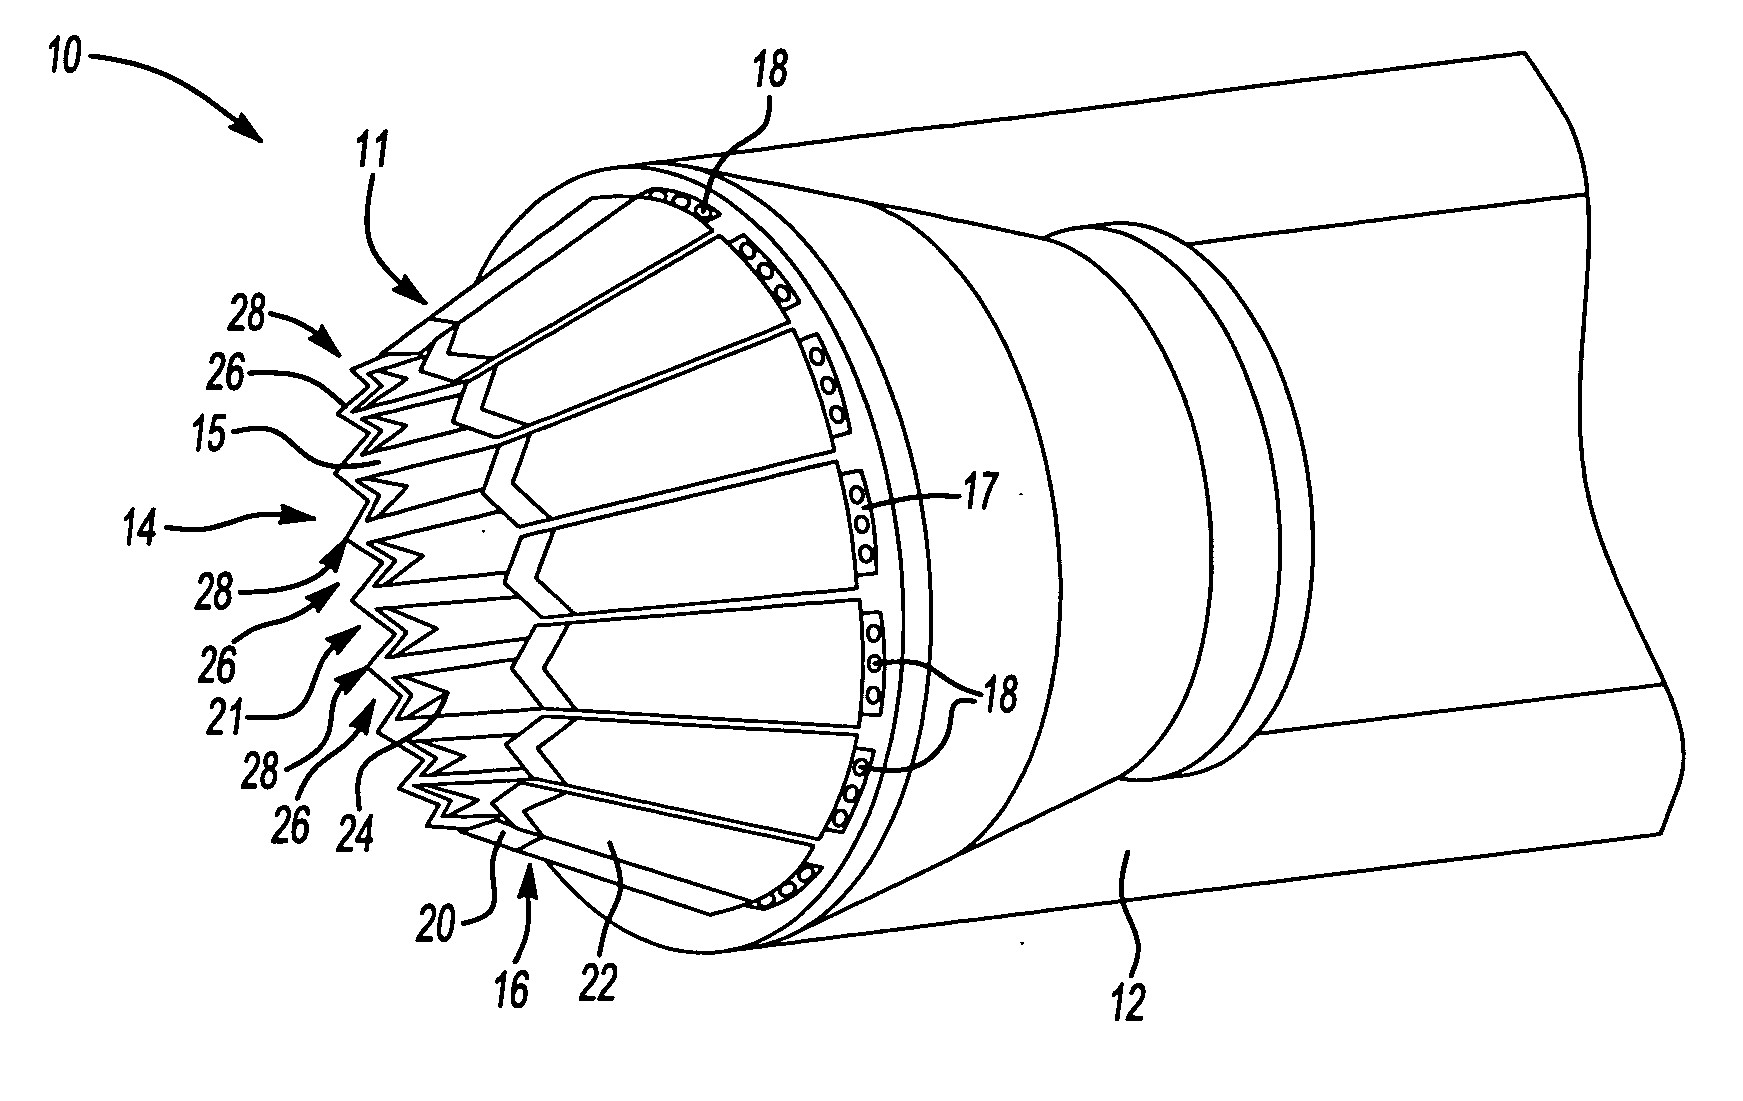 Reduced radar cross section exhaust nozzle assembly